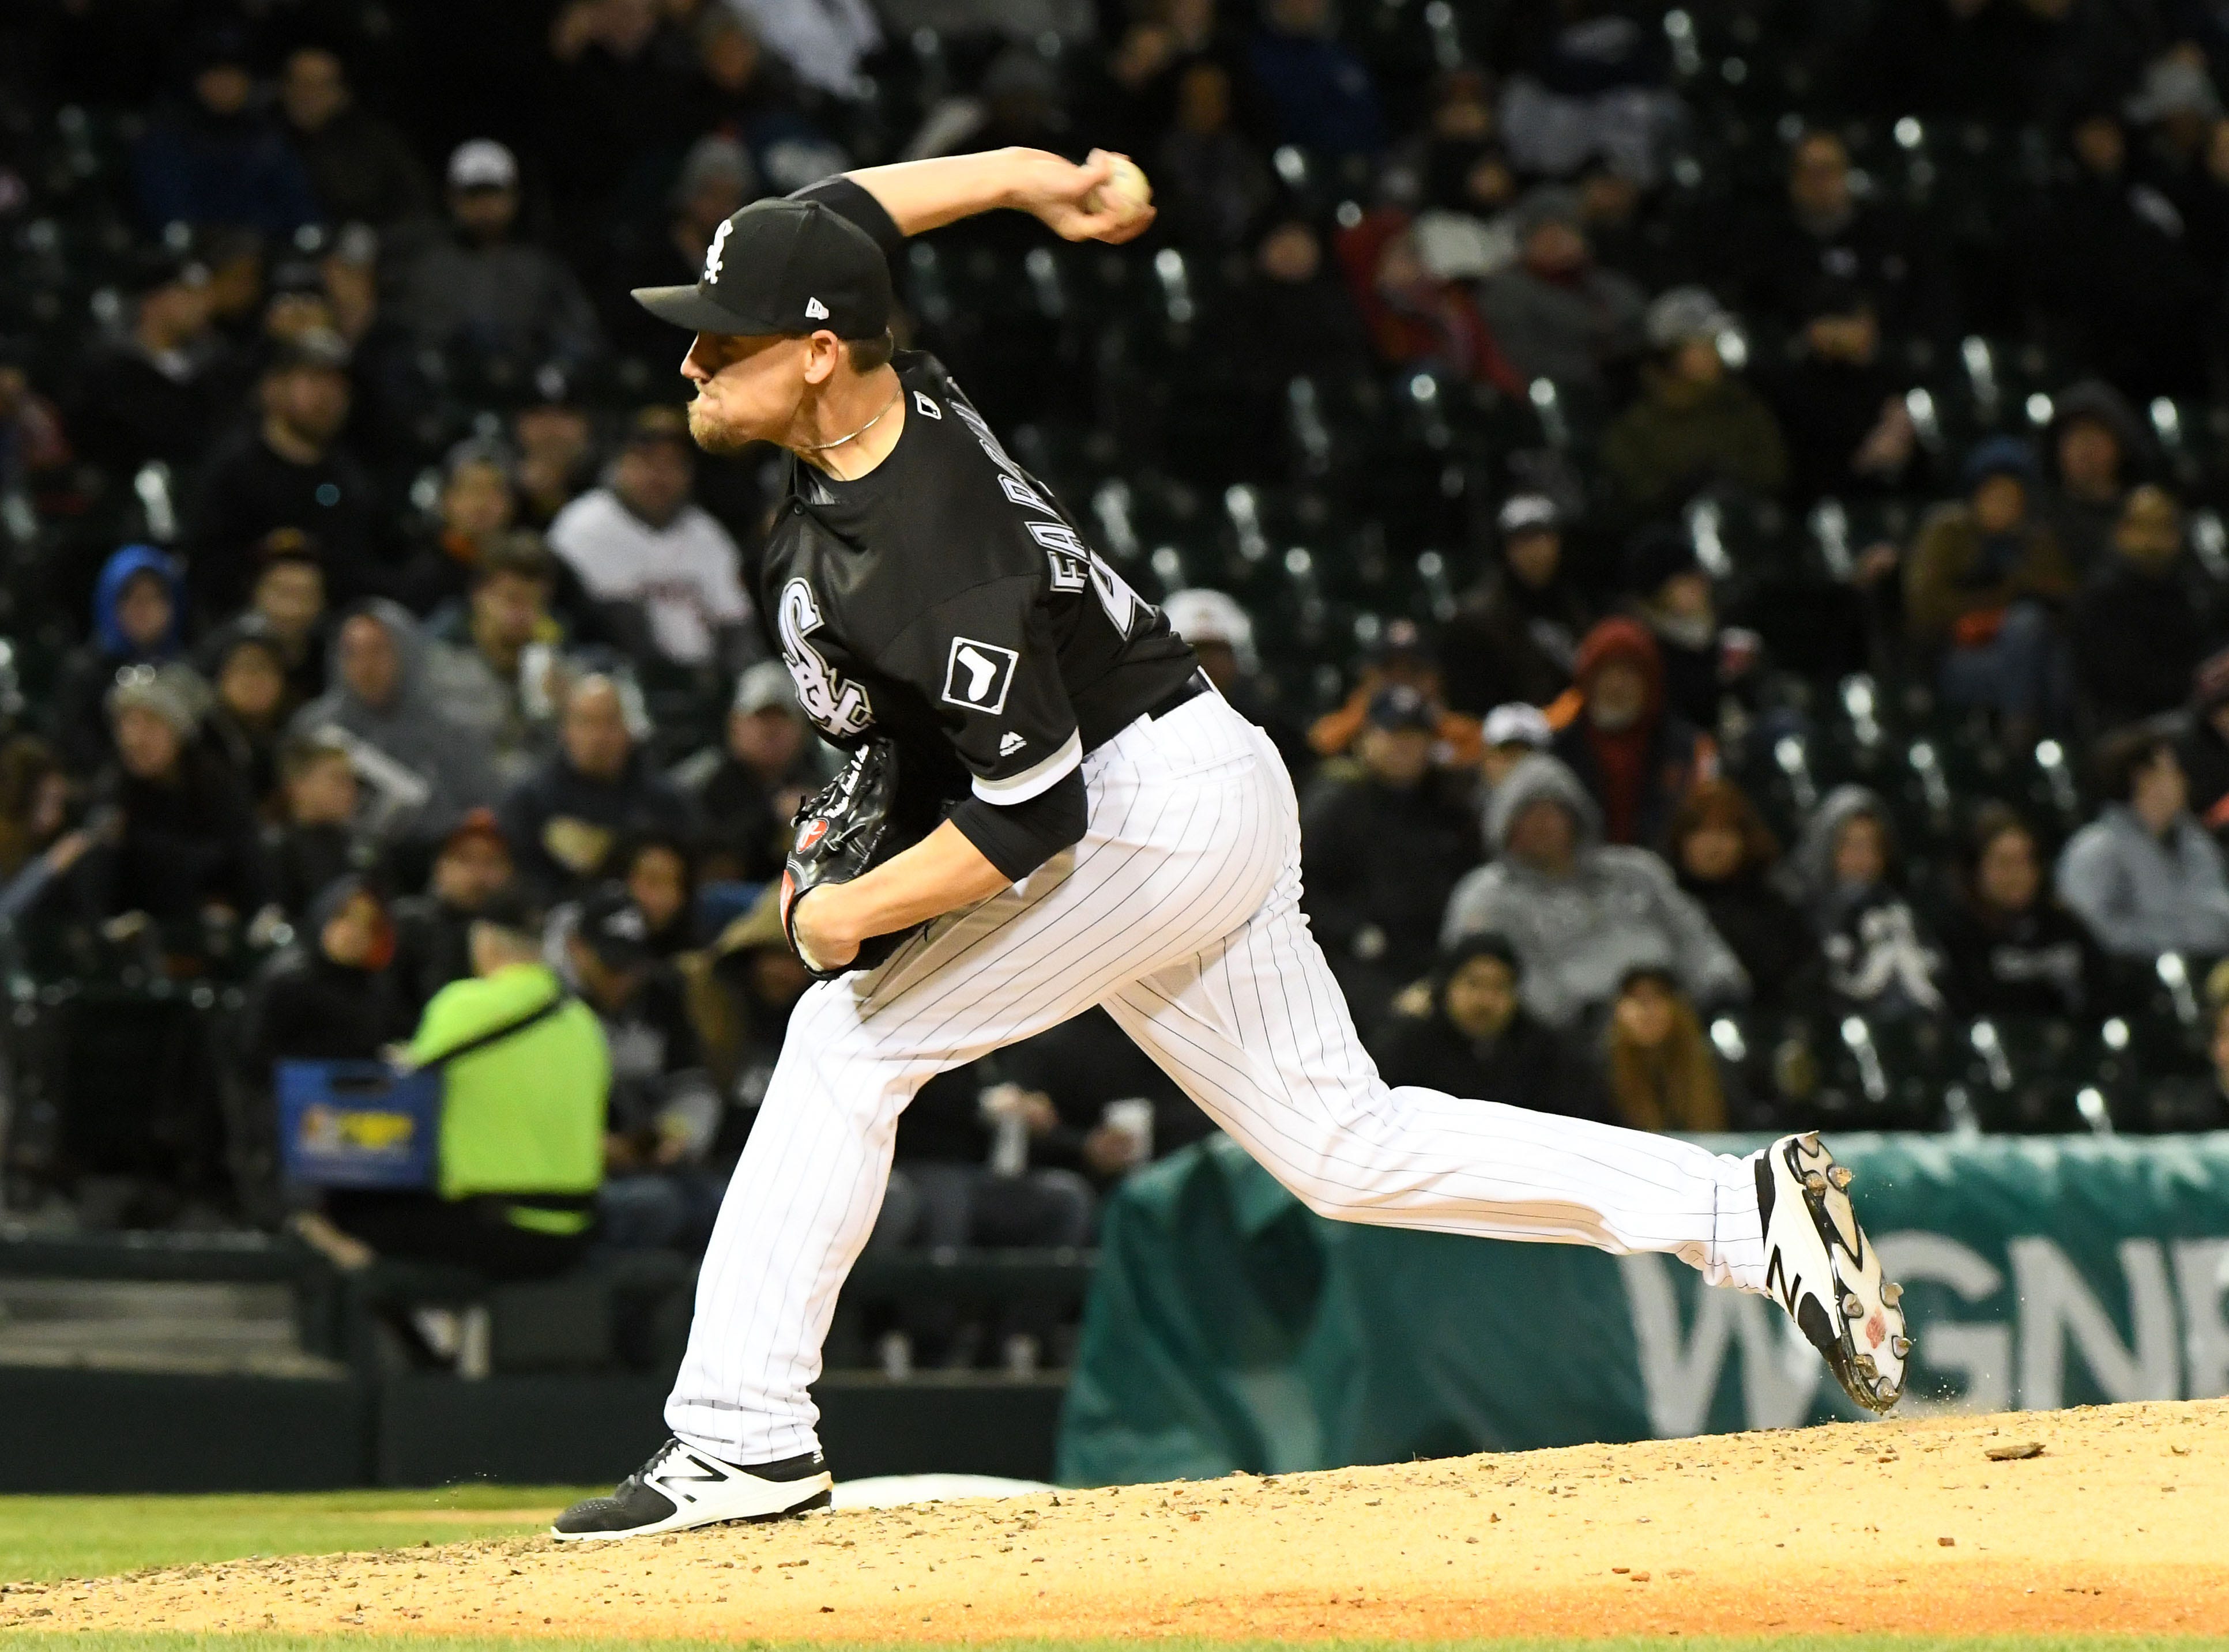 White Sox pitcher Danny Farquhar in critical condition after brain hemorrhage in dugout